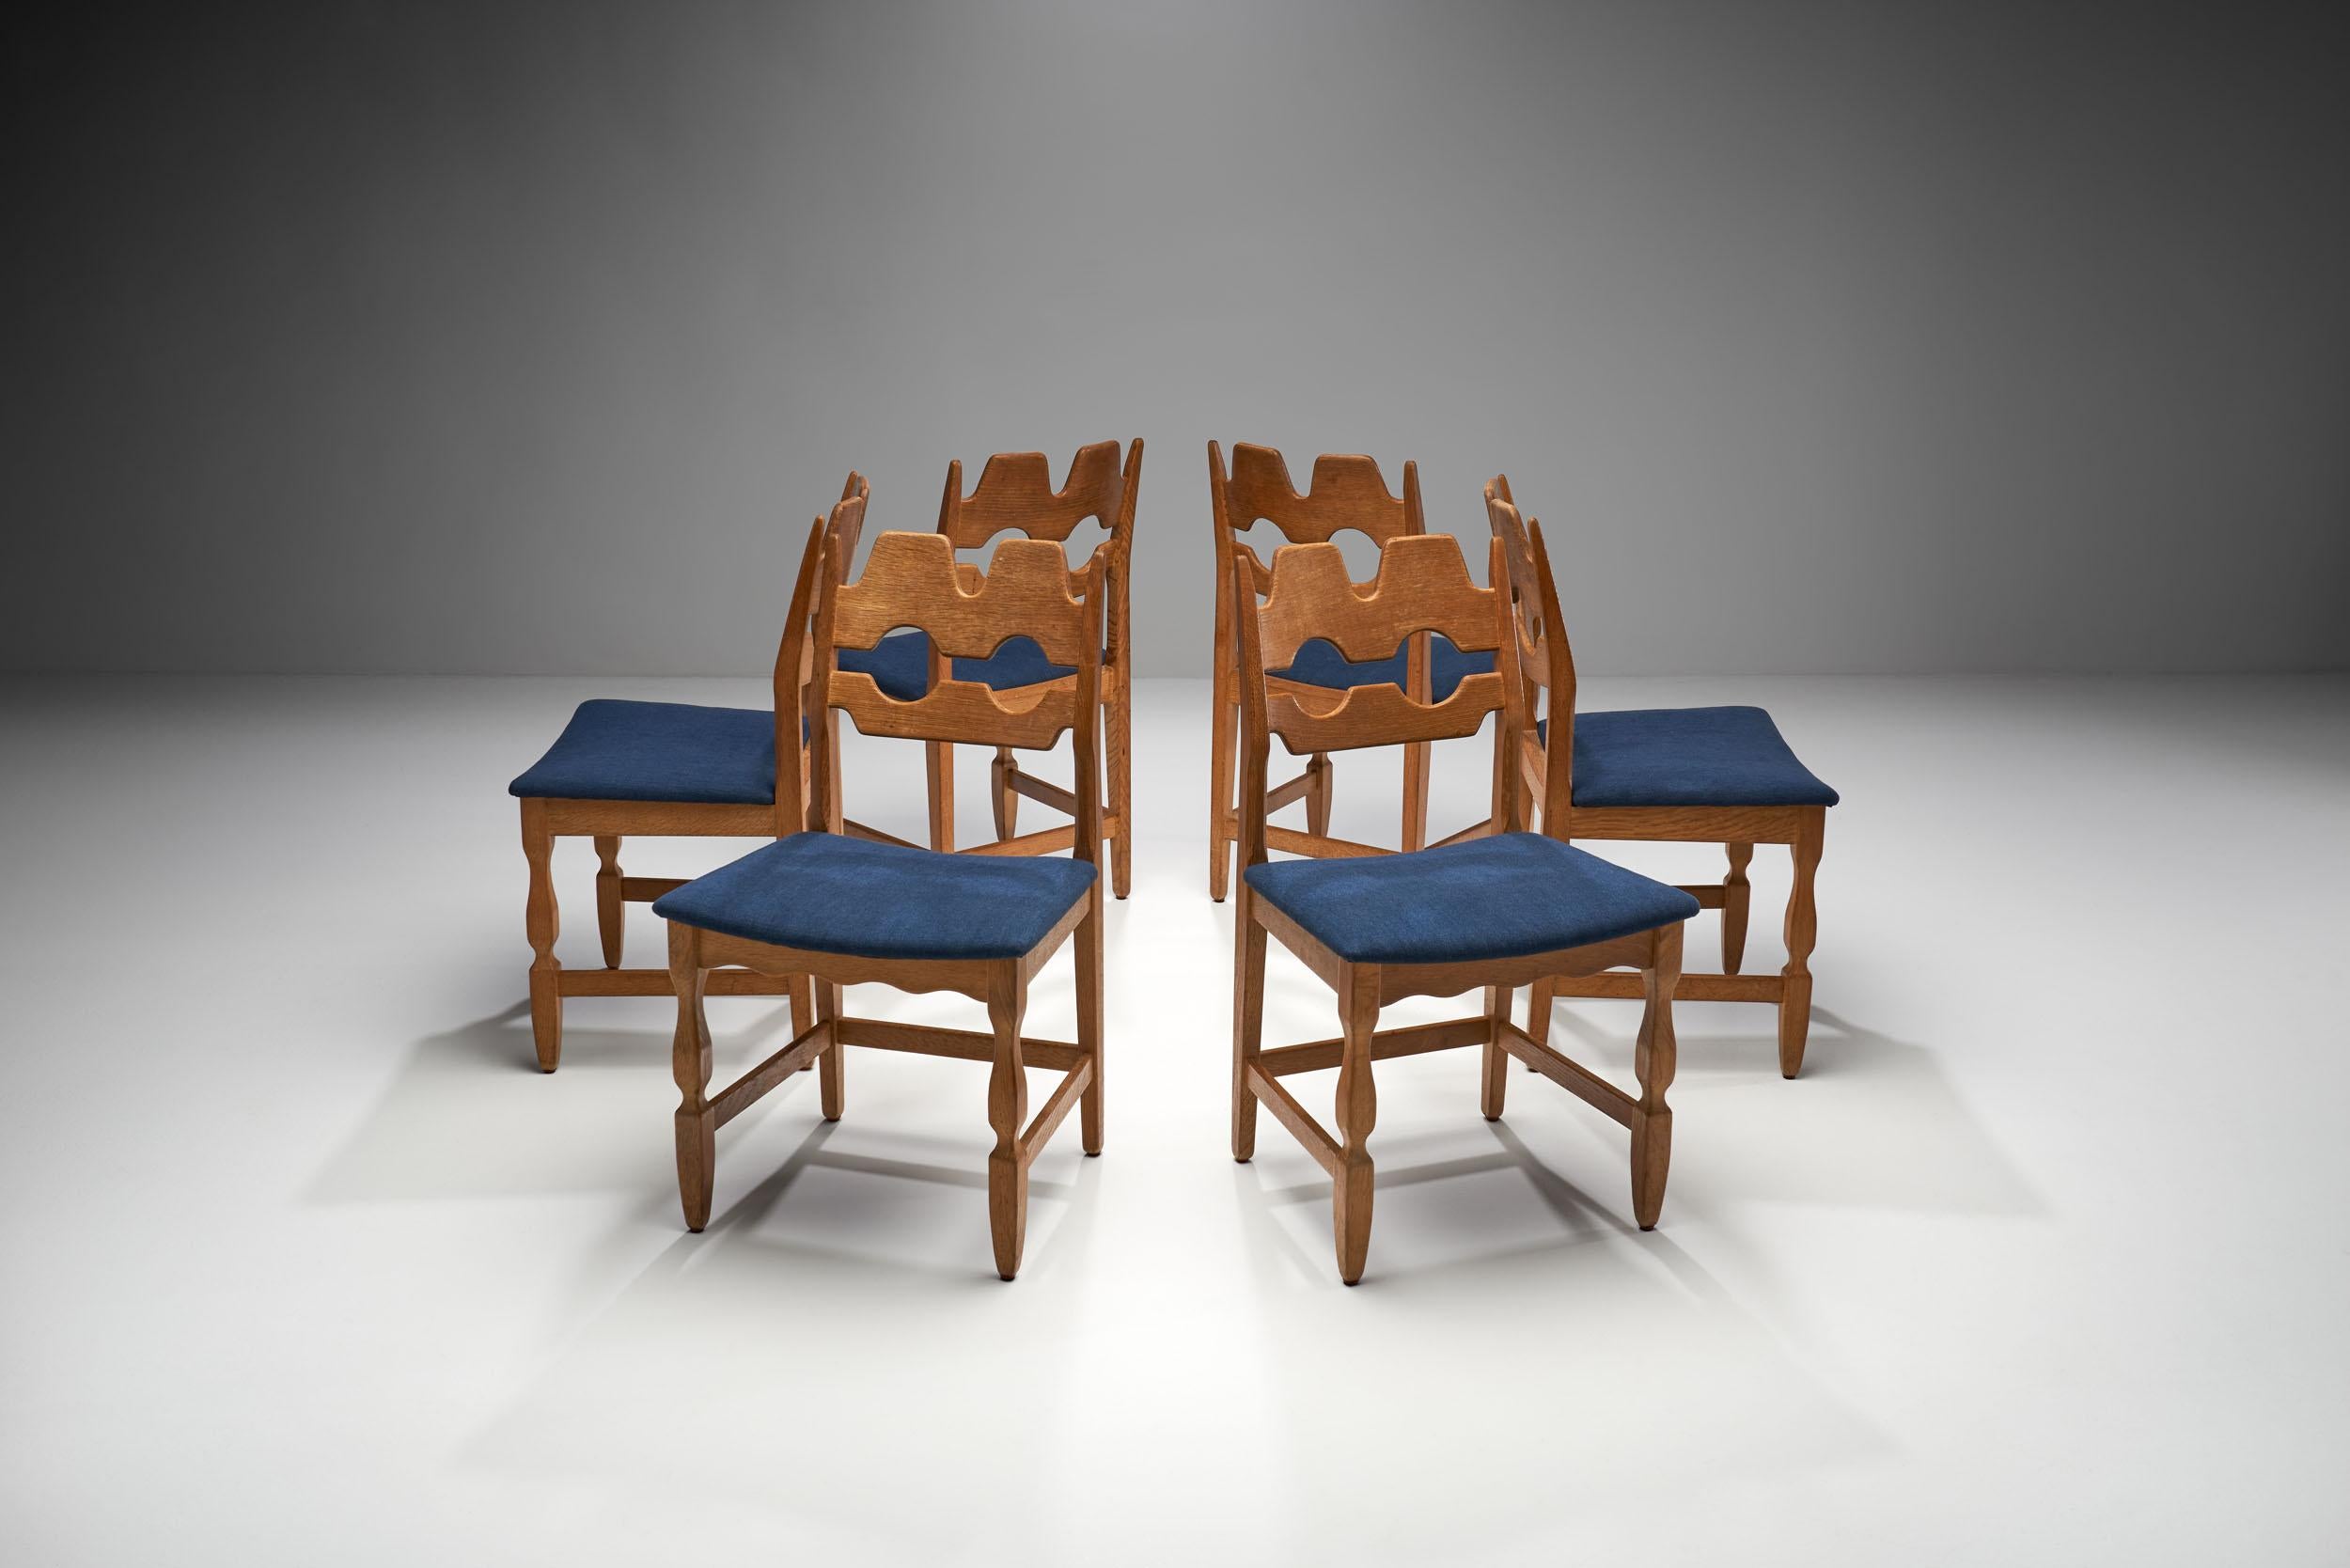 Henning Kjaernulf’s Razorblade chairs are the designer’s most distinctive designs. This set was manufactured by the Danish company EG Kvalitetsmobel in the 1960s, making it a true Danish mid-century set.

It is easy to see where the nickname of